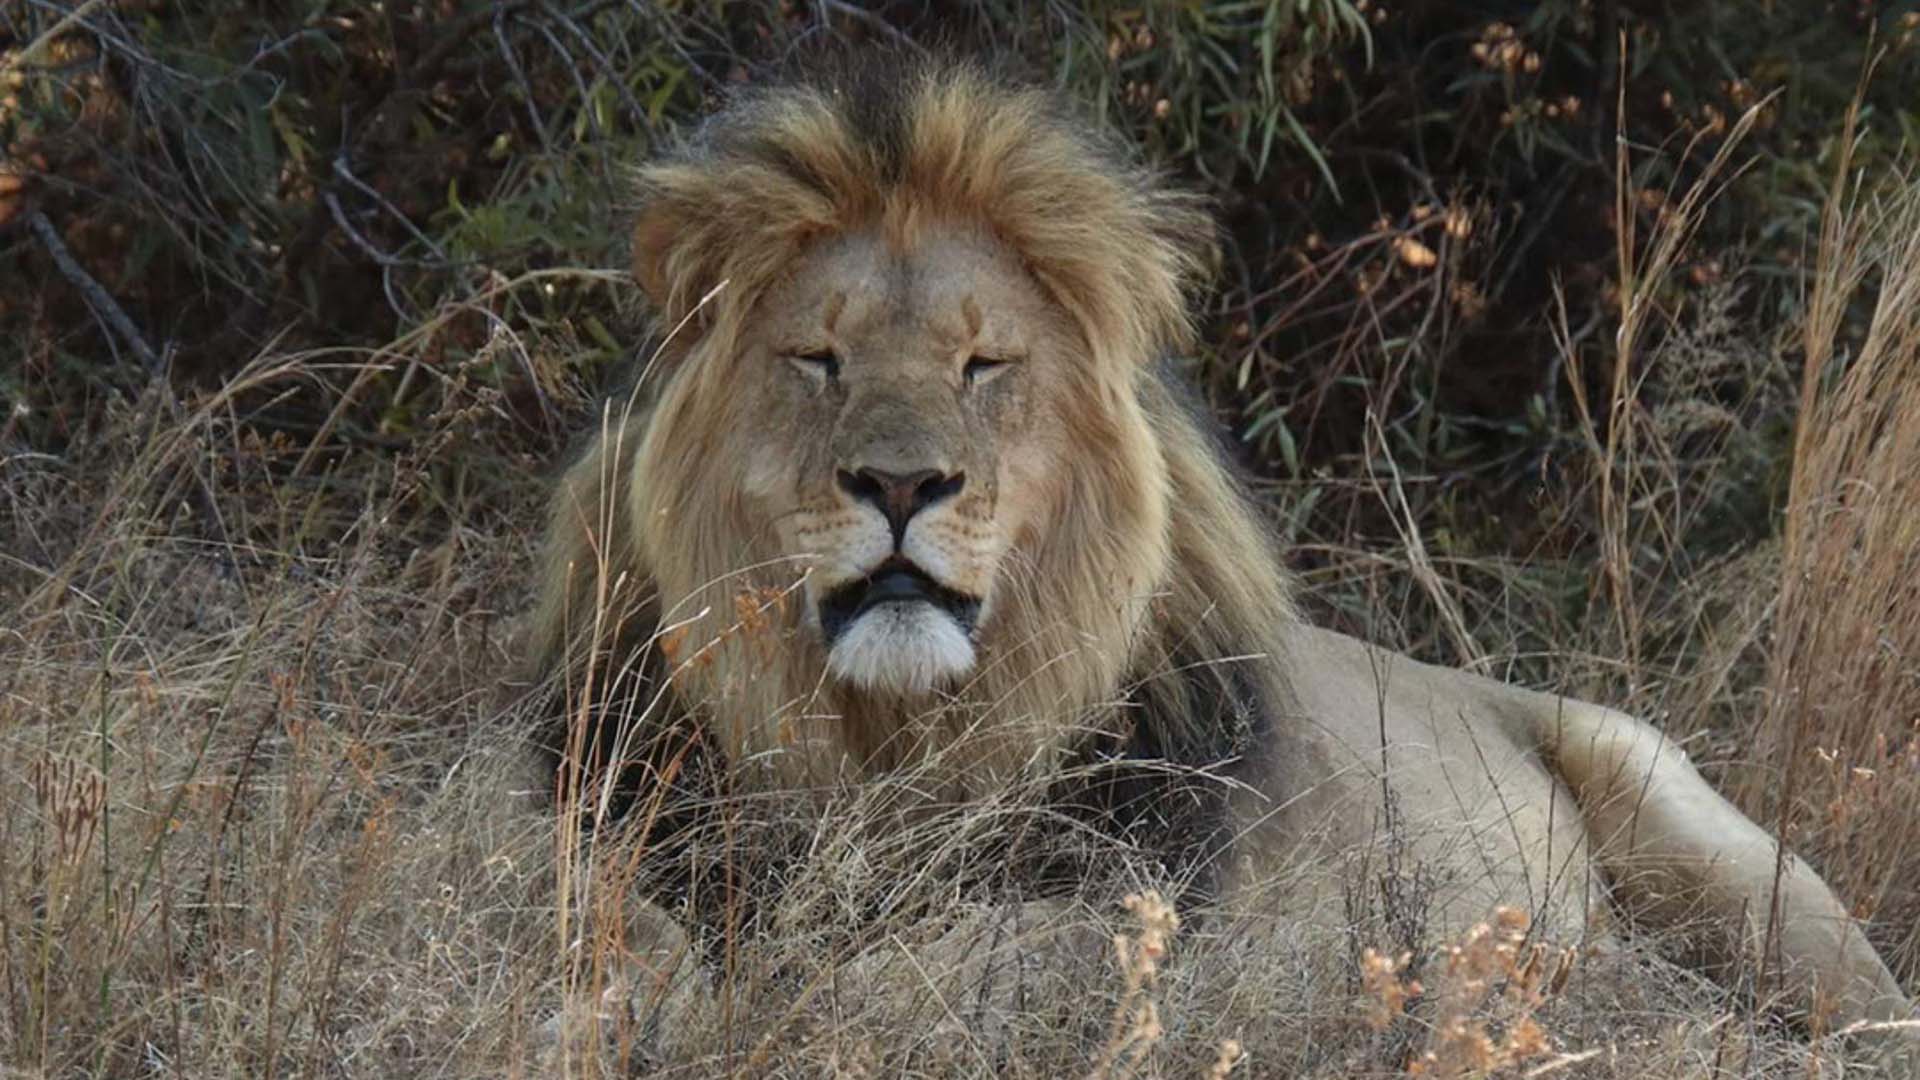 Wildlife travel - A lion in South Africa looks sleepily at the camera